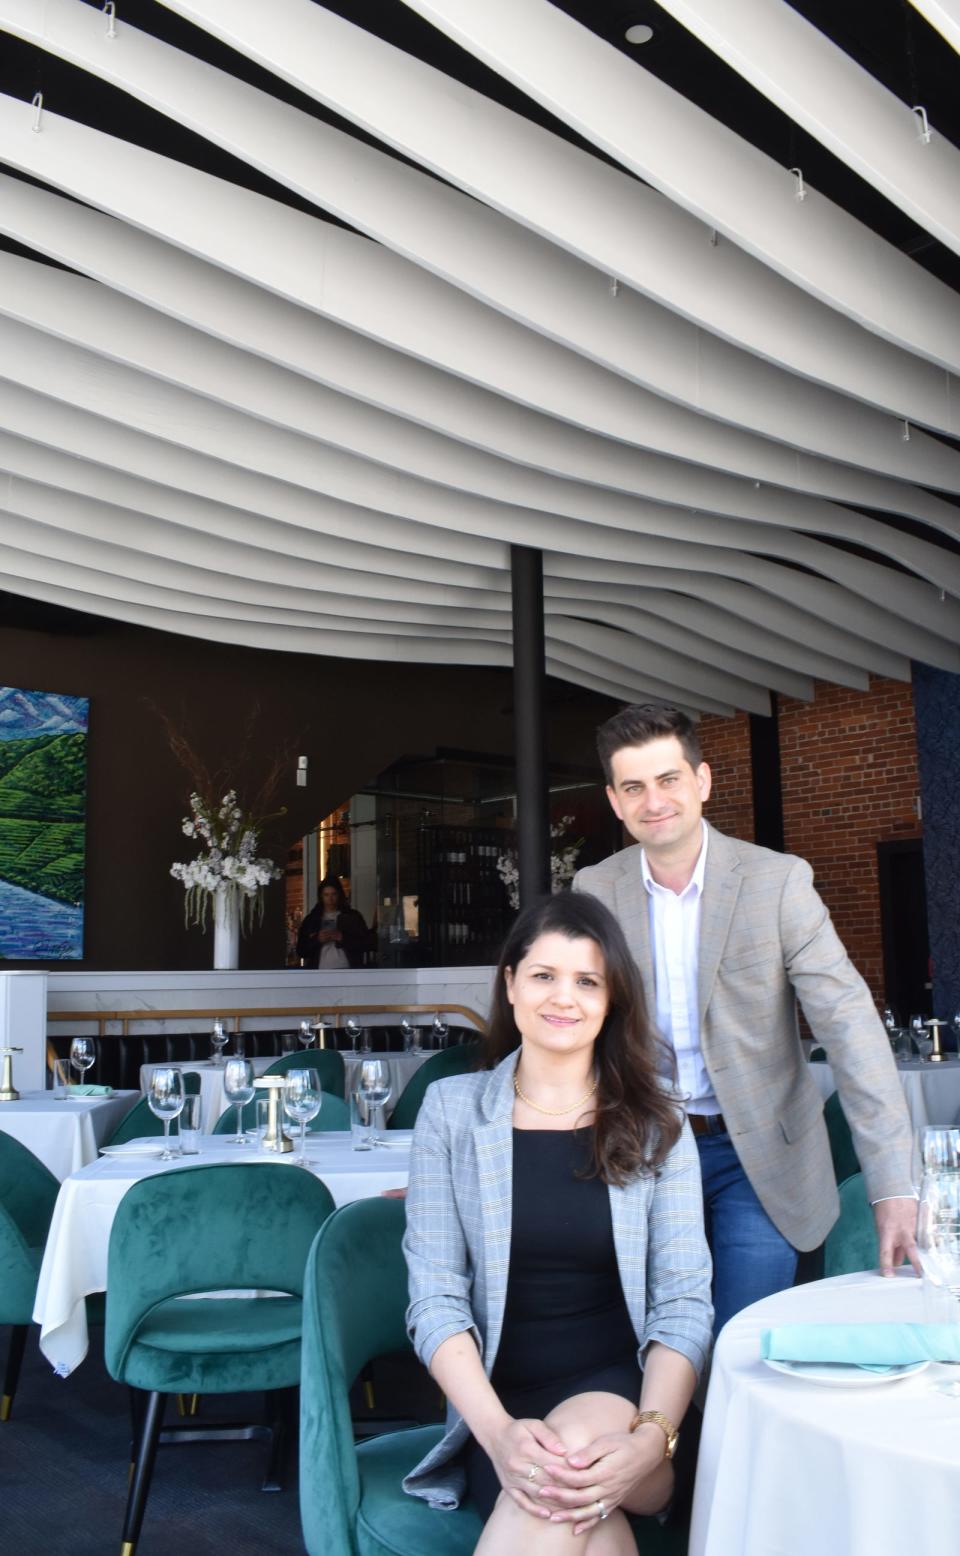 Paulo Filogenio and Ariane De Carvalho in Duoro Steakhouse restaurant within Towne House Restaurant in Fall River.